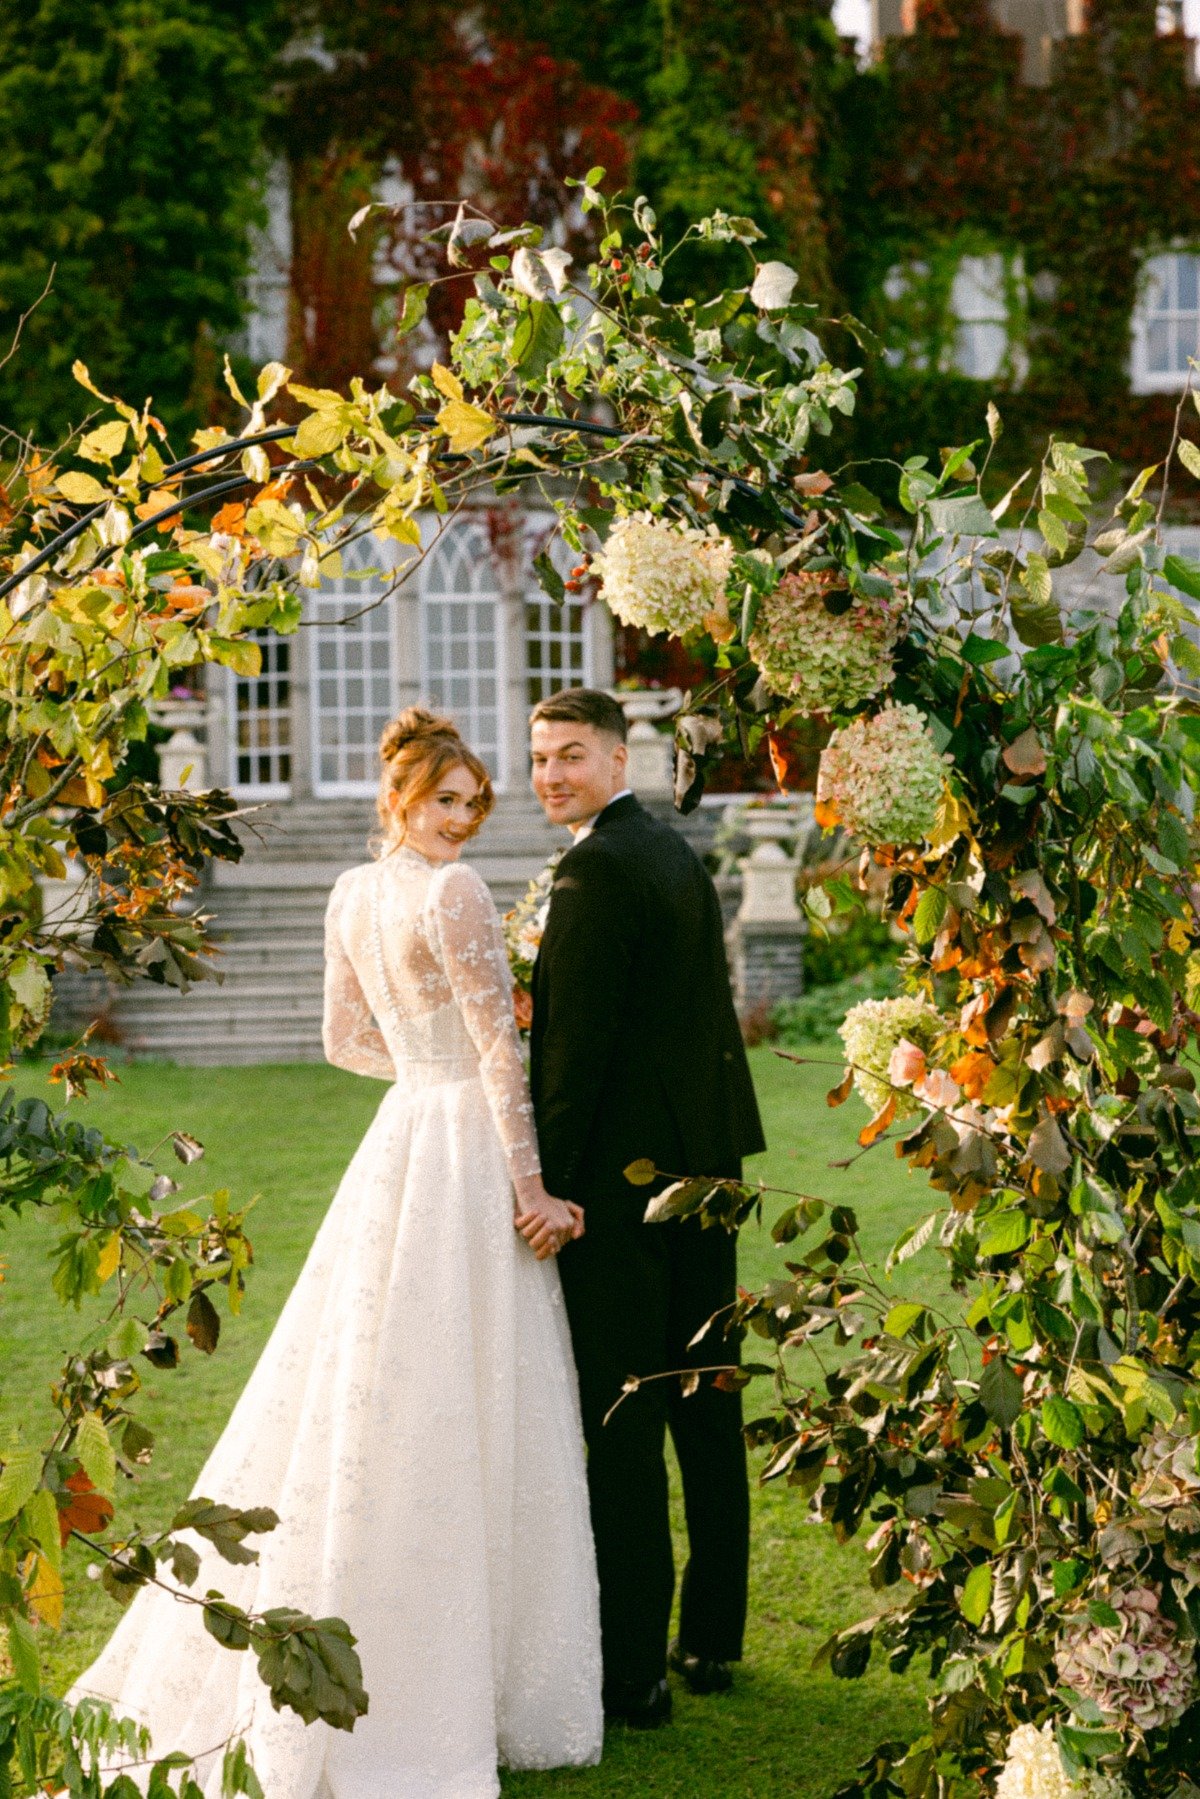 This inspo shoot will have you getting married in Ireland in autumn